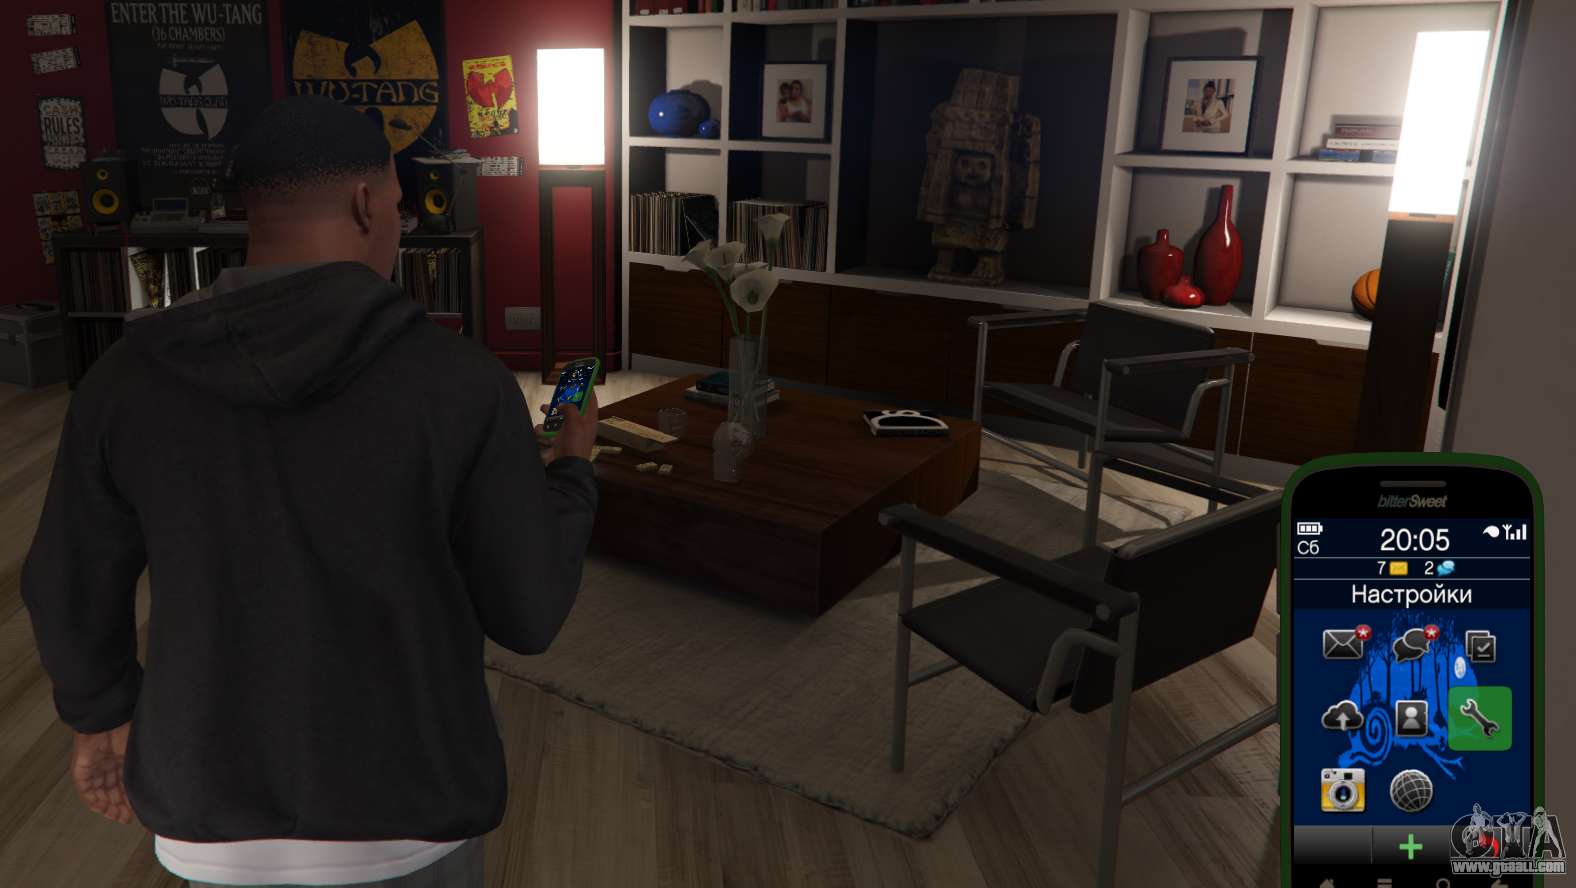 New Wallpaper for Phone Franklin and Michael for GTA 5